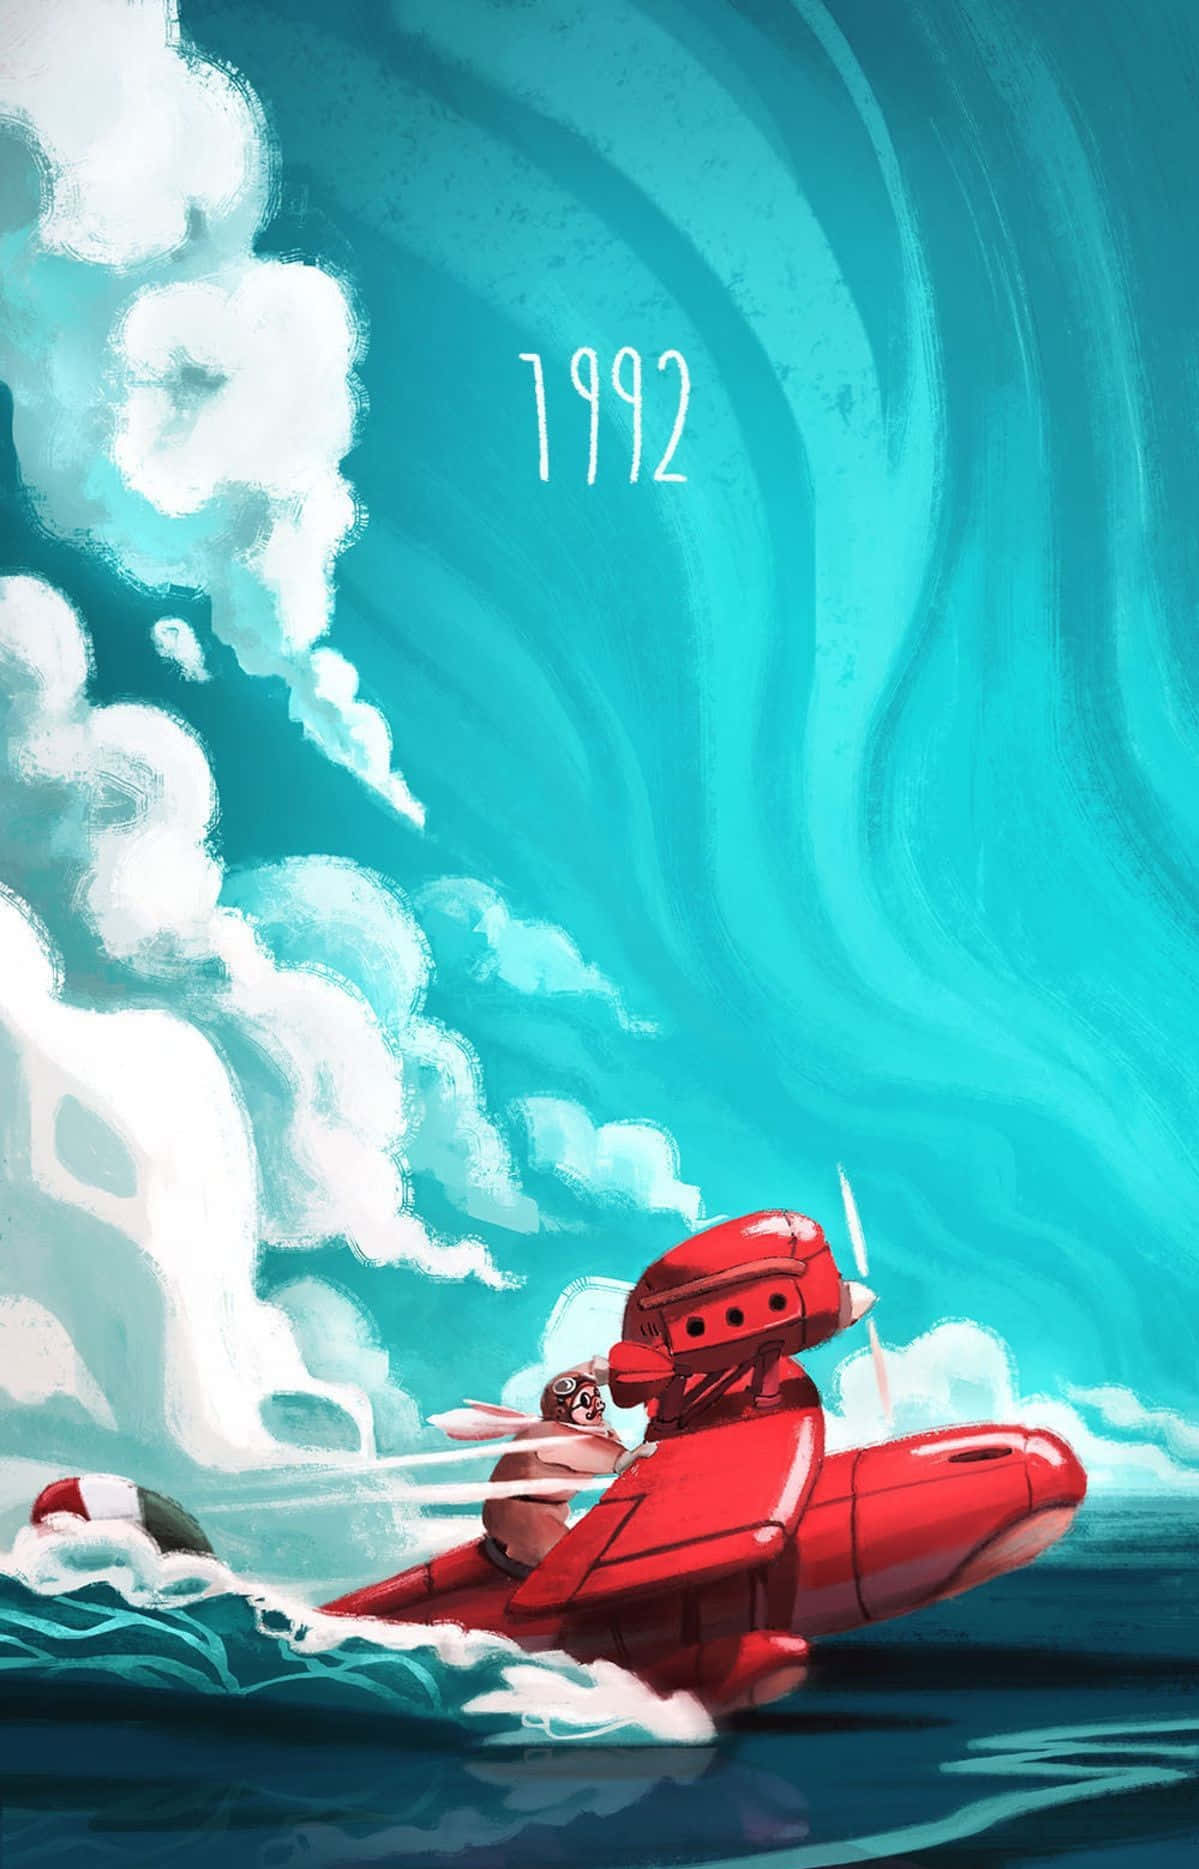 Porco Rosso flying over the ocean in his signature red plane Wallpaper